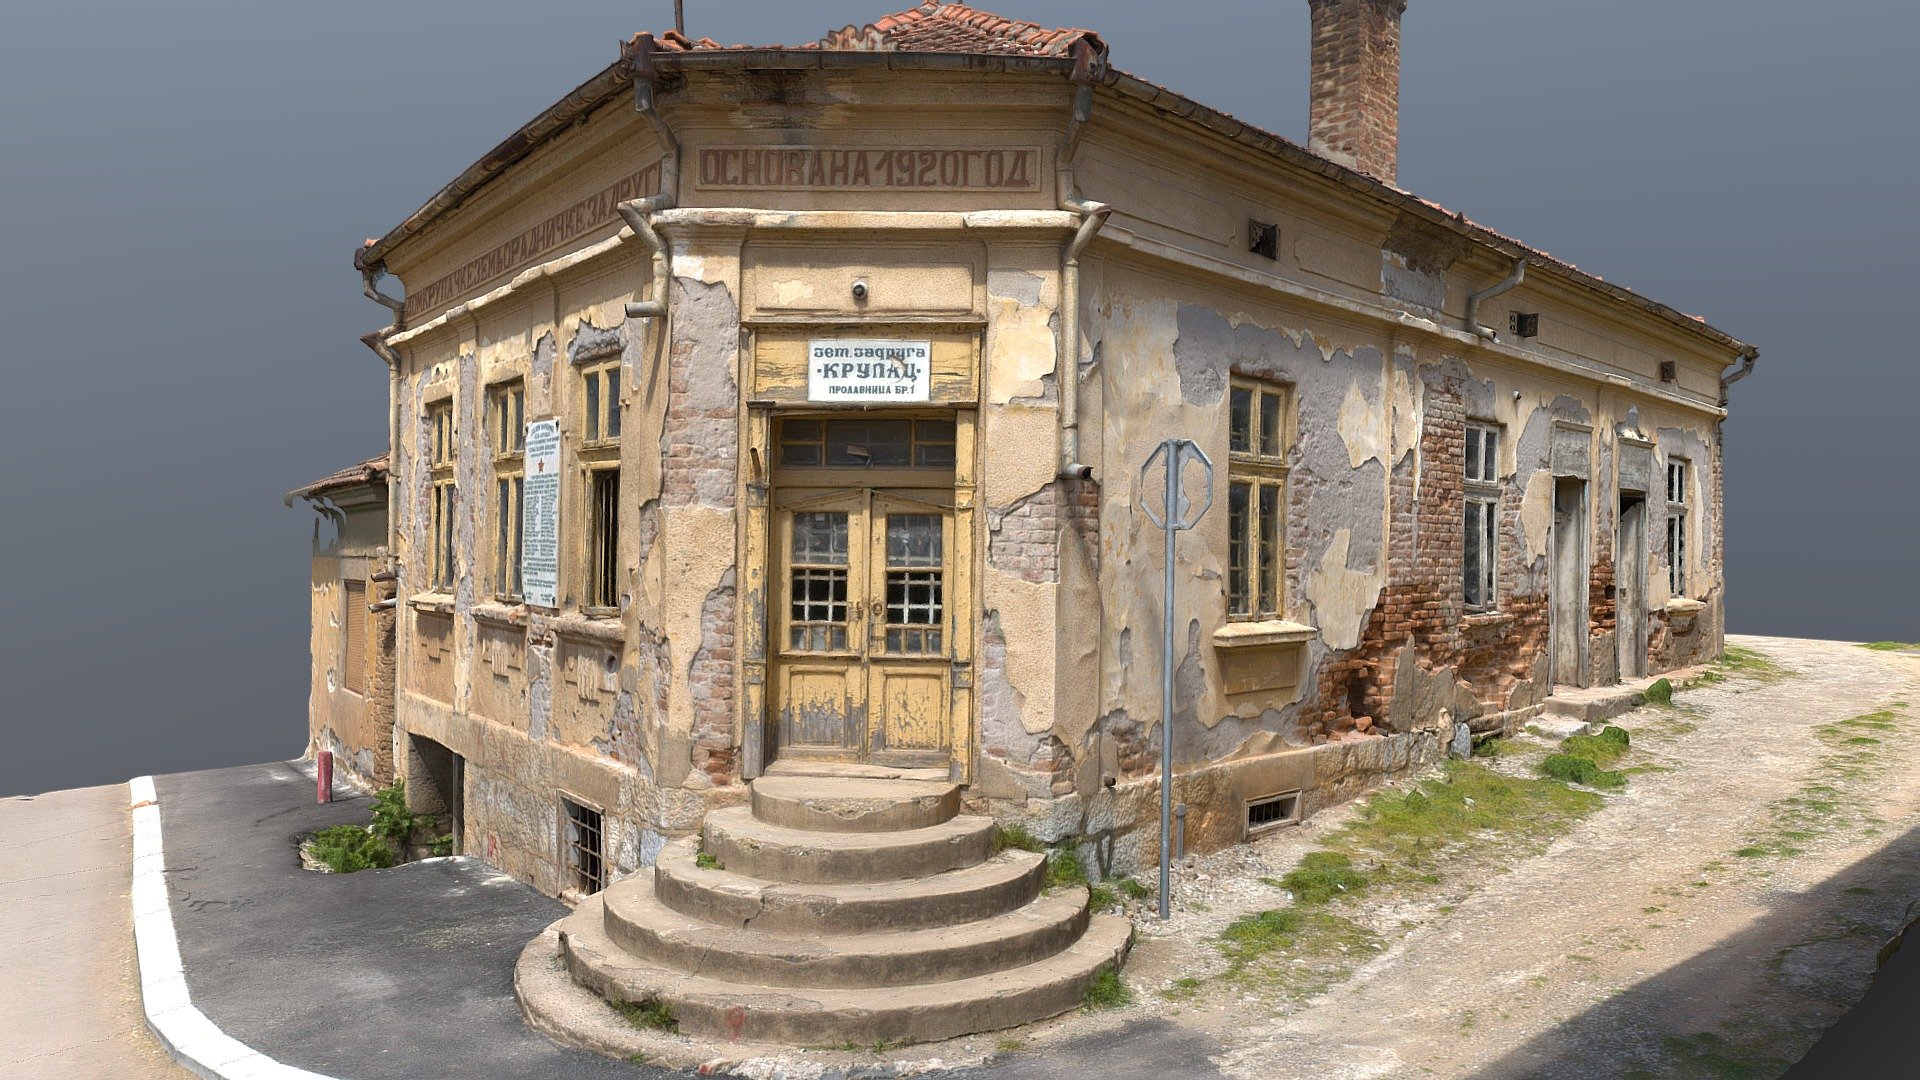 Тhe model represents the building of an agricultural cooperative in the village of Krupac, municipality of Pirot. It was built in 1920. The building is one of the most representative in the village for the period in which it was built.
The photogrammetric model was created for the needs of the &ldquo;study of the protection of the village of Krupac